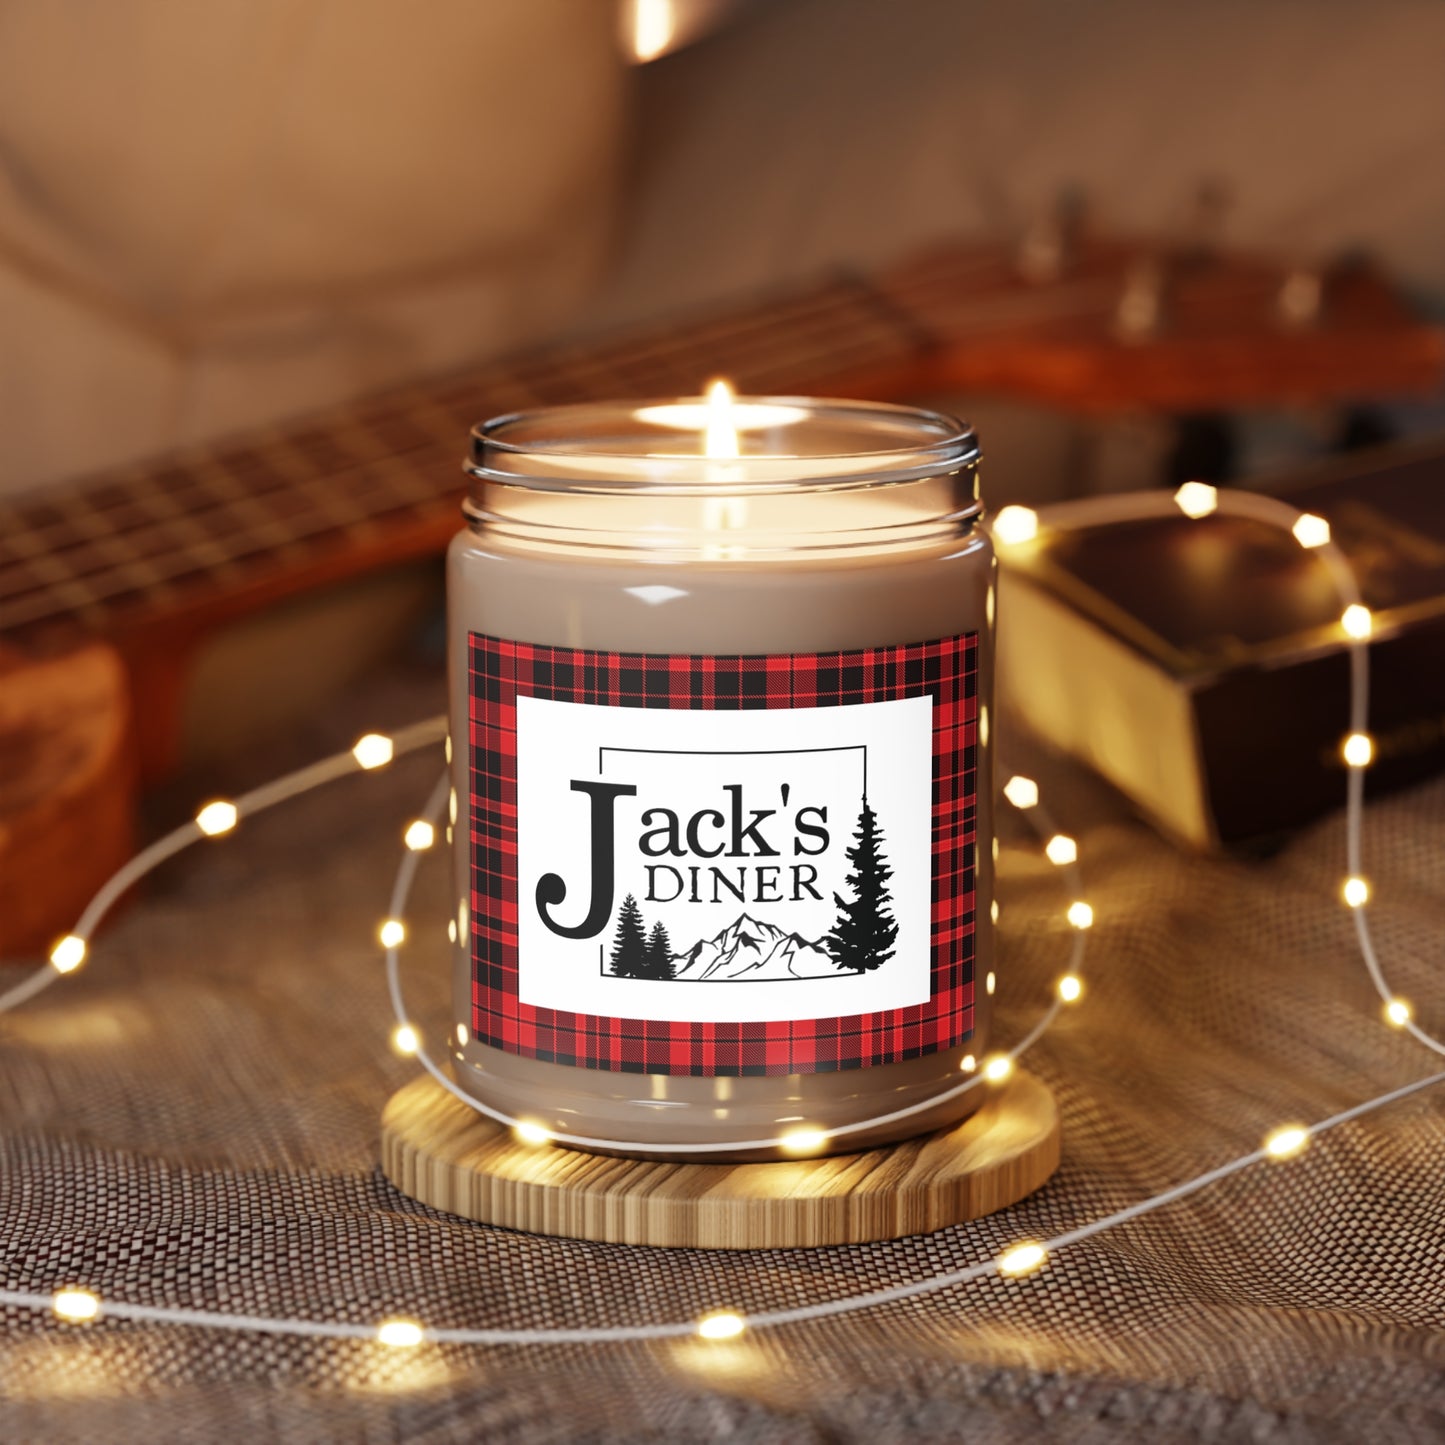 Jack's Diner Scented Soy Candle, 9oz (Holiday Design) - FREE U.S. SHIPPING